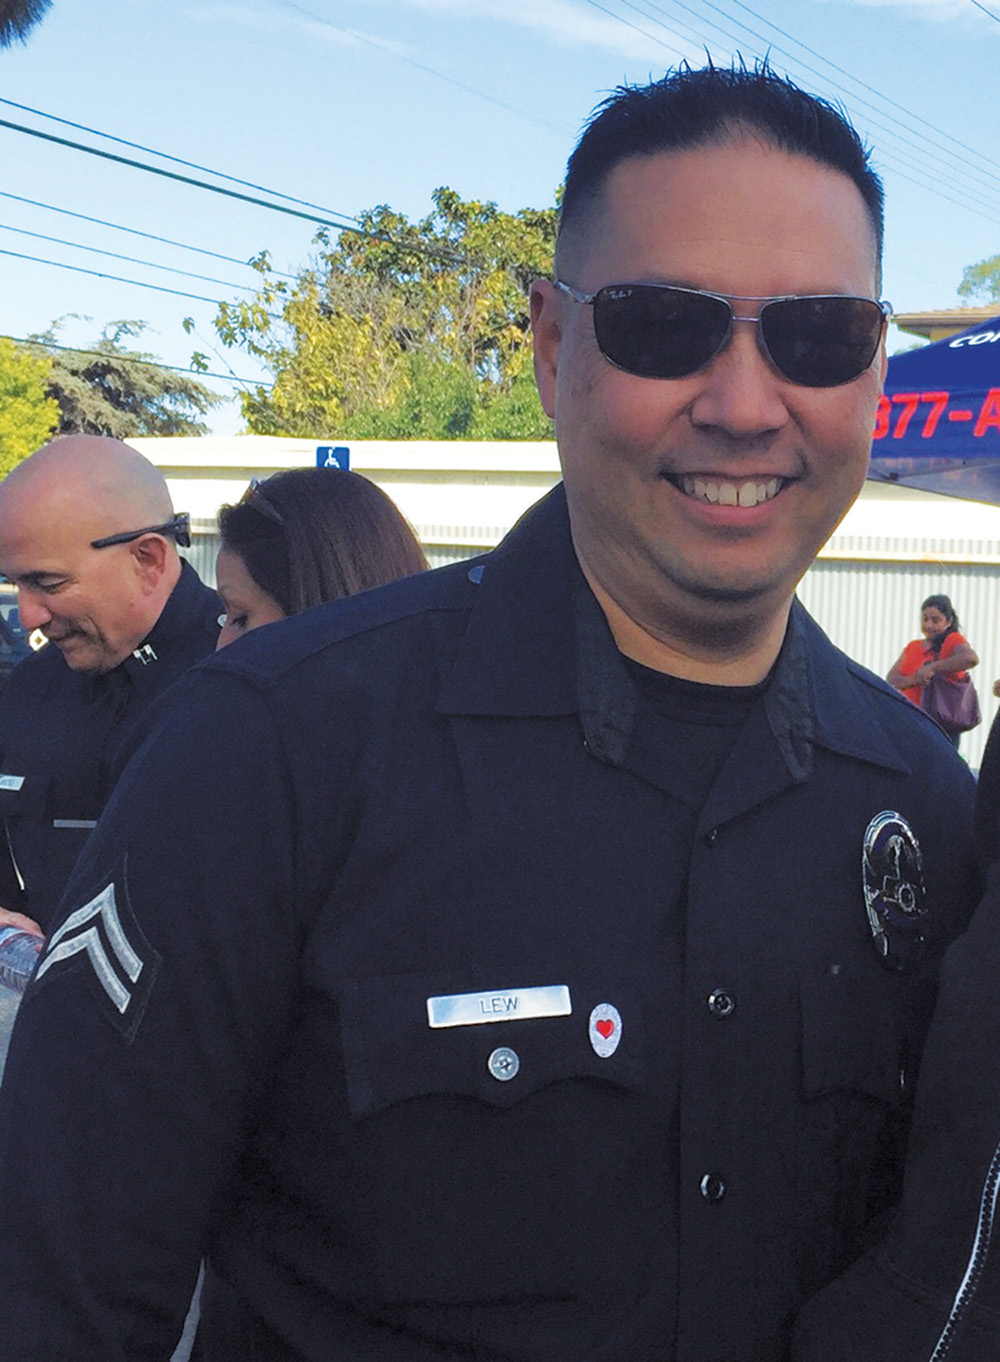 Local officer shows heart through nonprofit